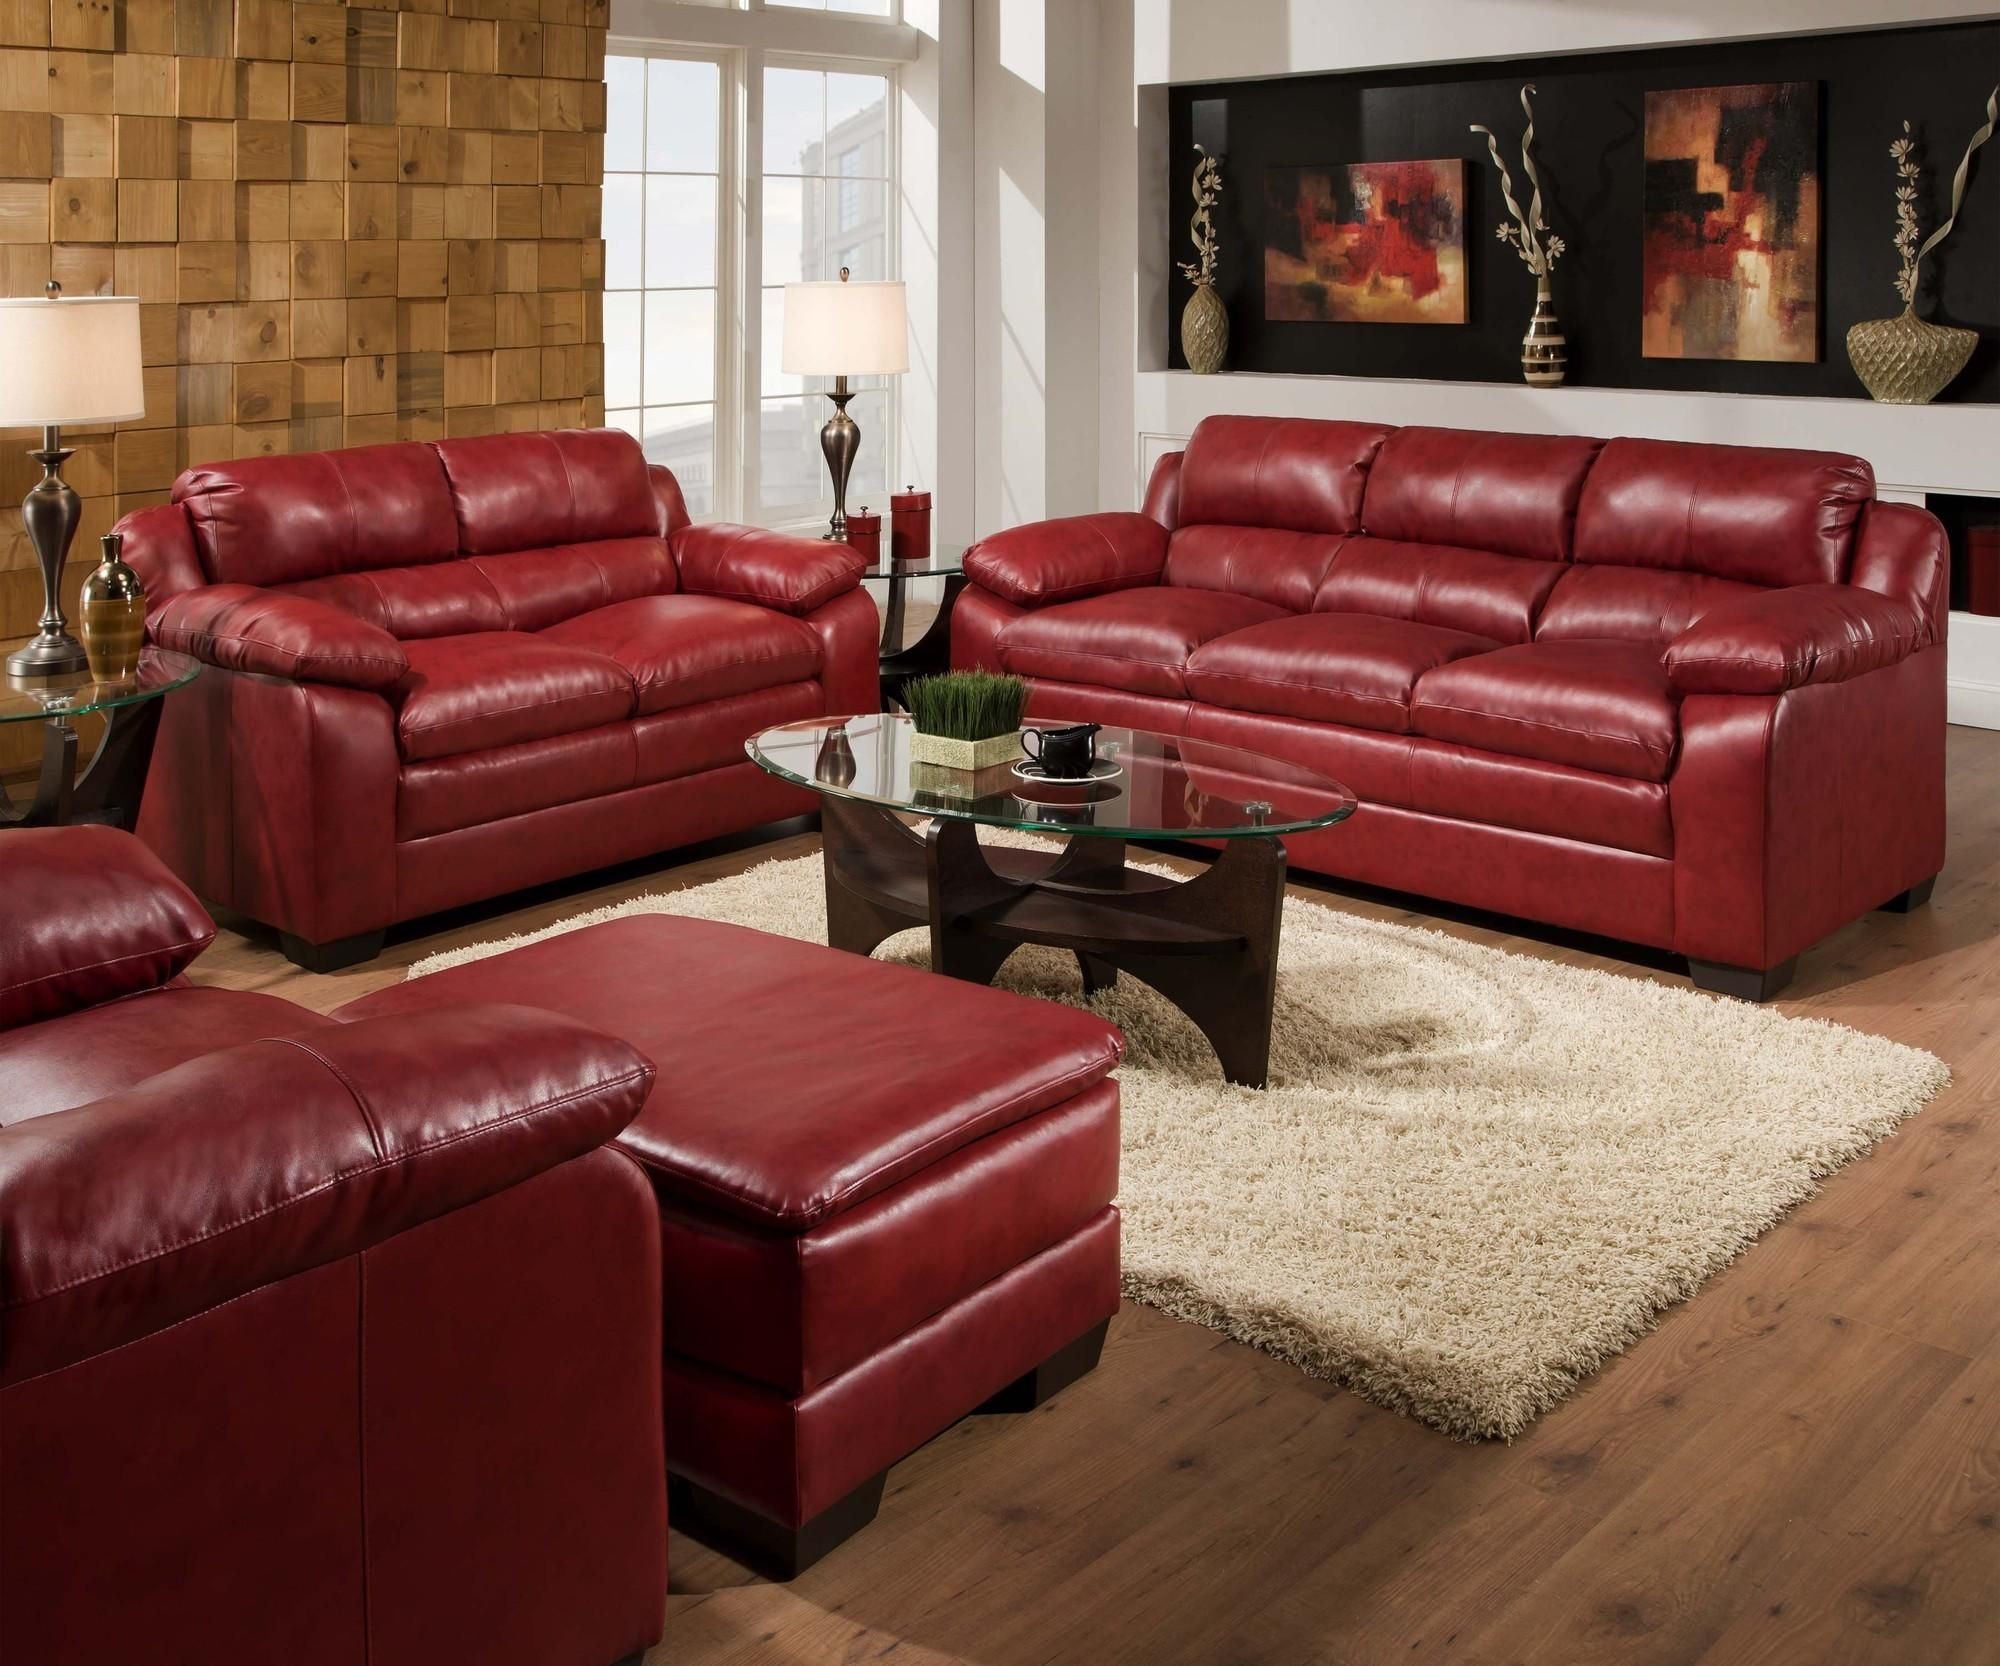 Simmons Leather Sofa With Design Hd Images 7283 | Kengire Pertaining To Simmons Leather Sofas And Loveseats (View 13 of 20)